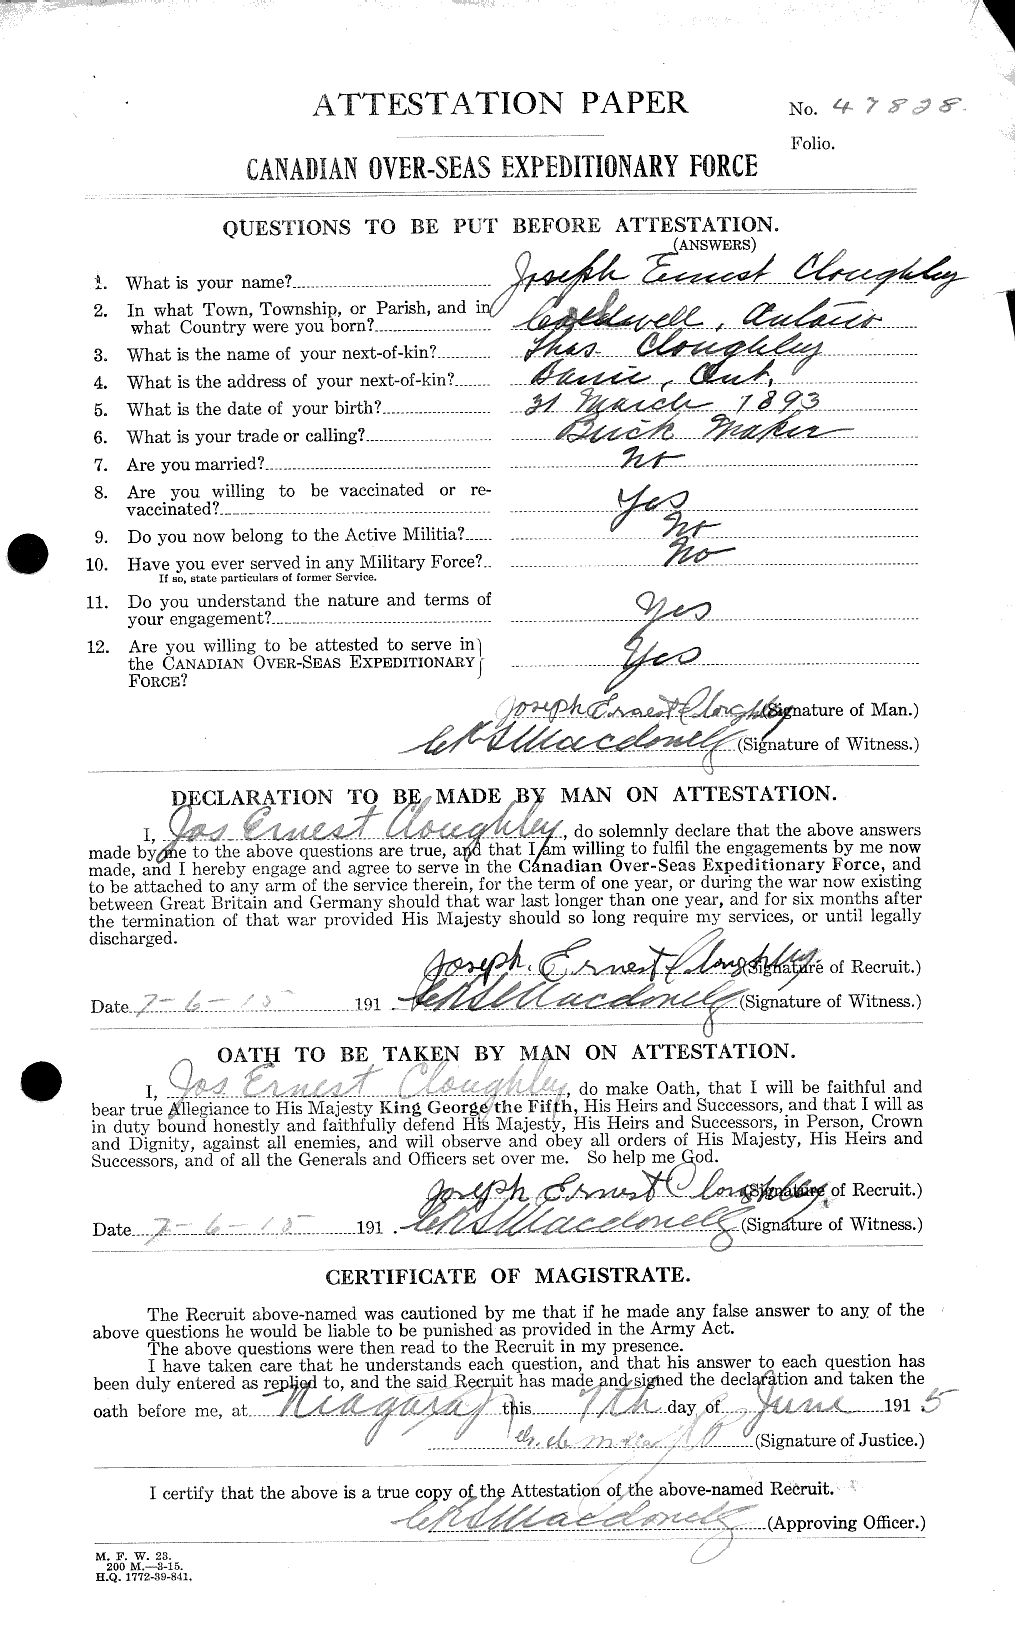 Personnel Records of the First World War - CEF 026025a